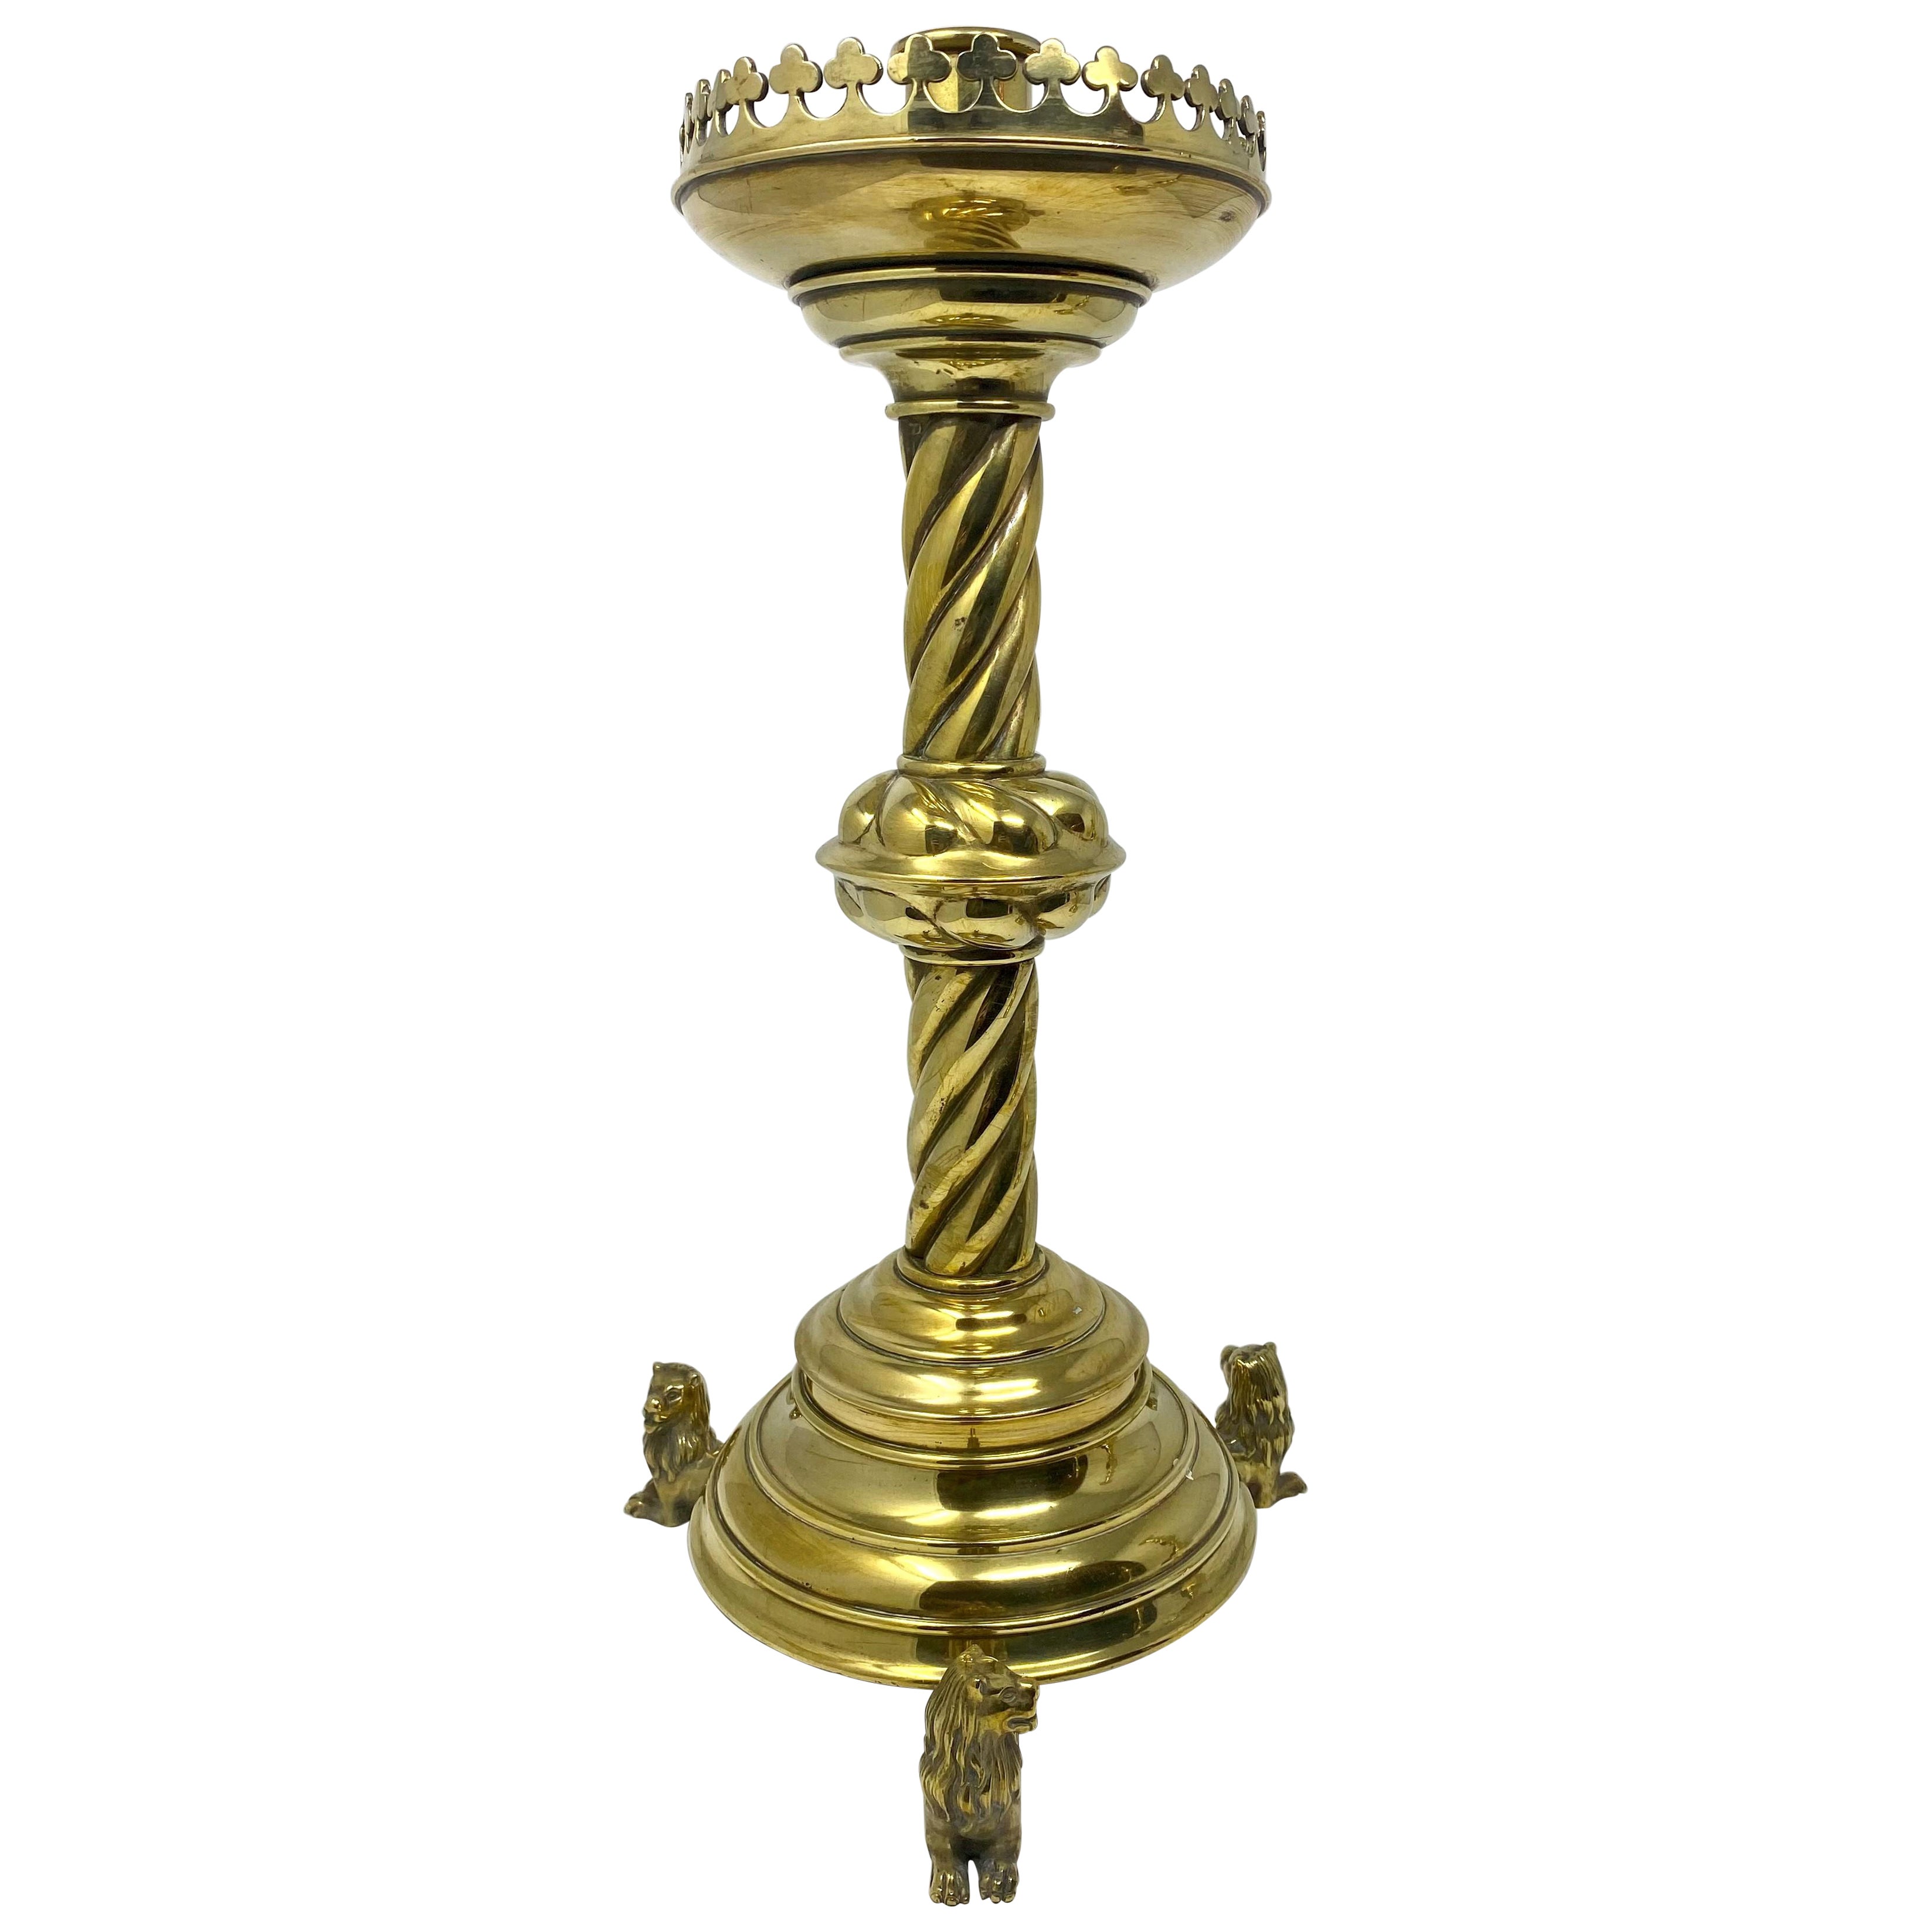 Antique English Victorian Brass Candlestick with Lions, circa 1880-1890 For Sale